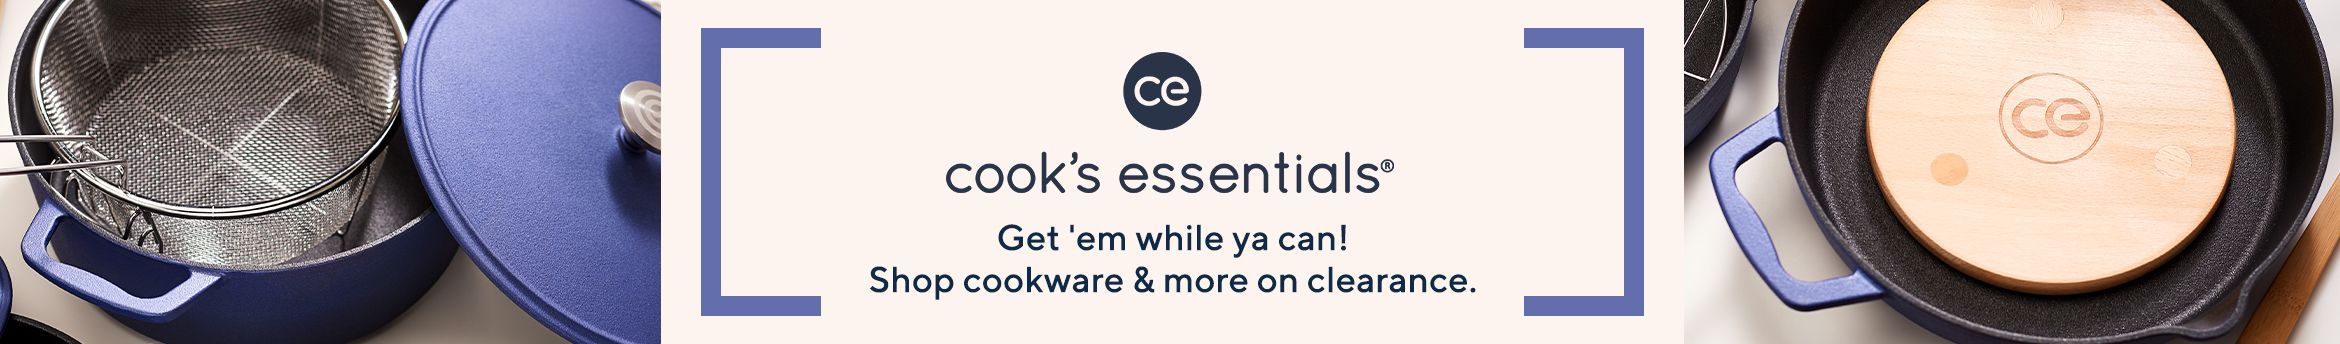 Cook's Essentials  Get 'em while ya can! Shop cookware & more on clearance. 